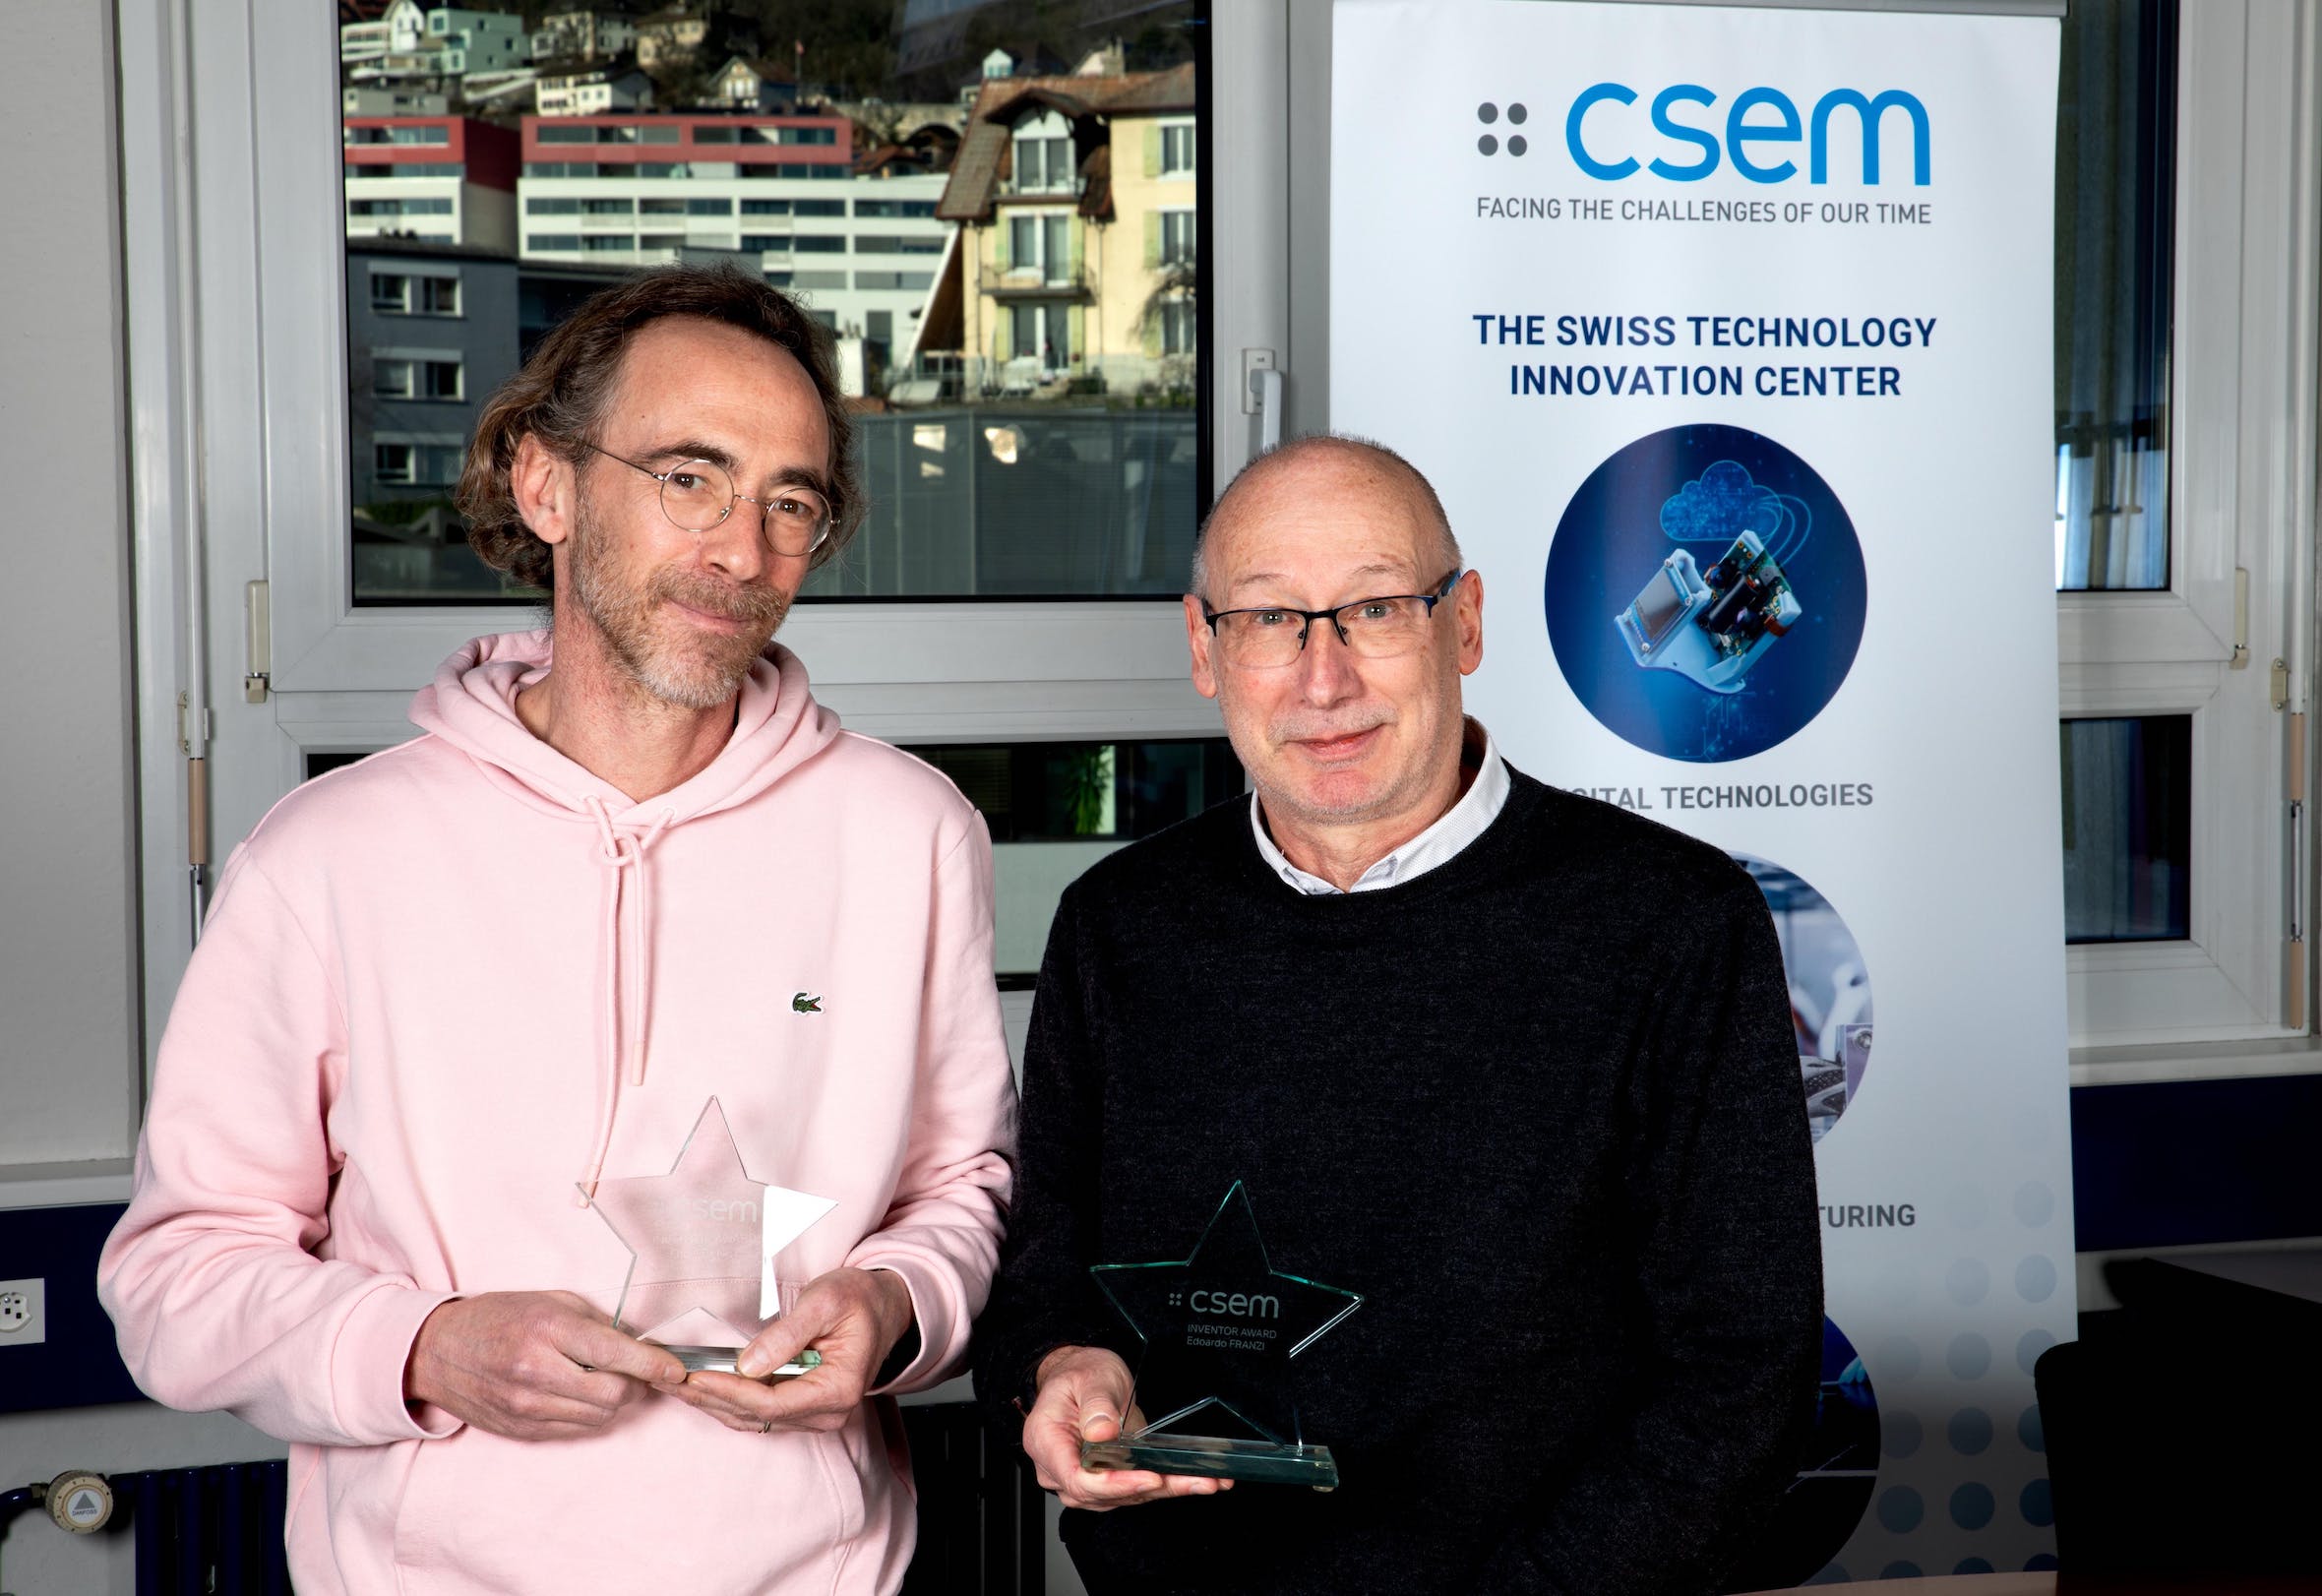 Eric Grenet (left) and Edoardo Franzi (right) were presented with the "CSEM Inventor Award 2024" for their invention of "spaceCoder technology", which they developed together with former CSEM employees David Hasler and Peter Masa.